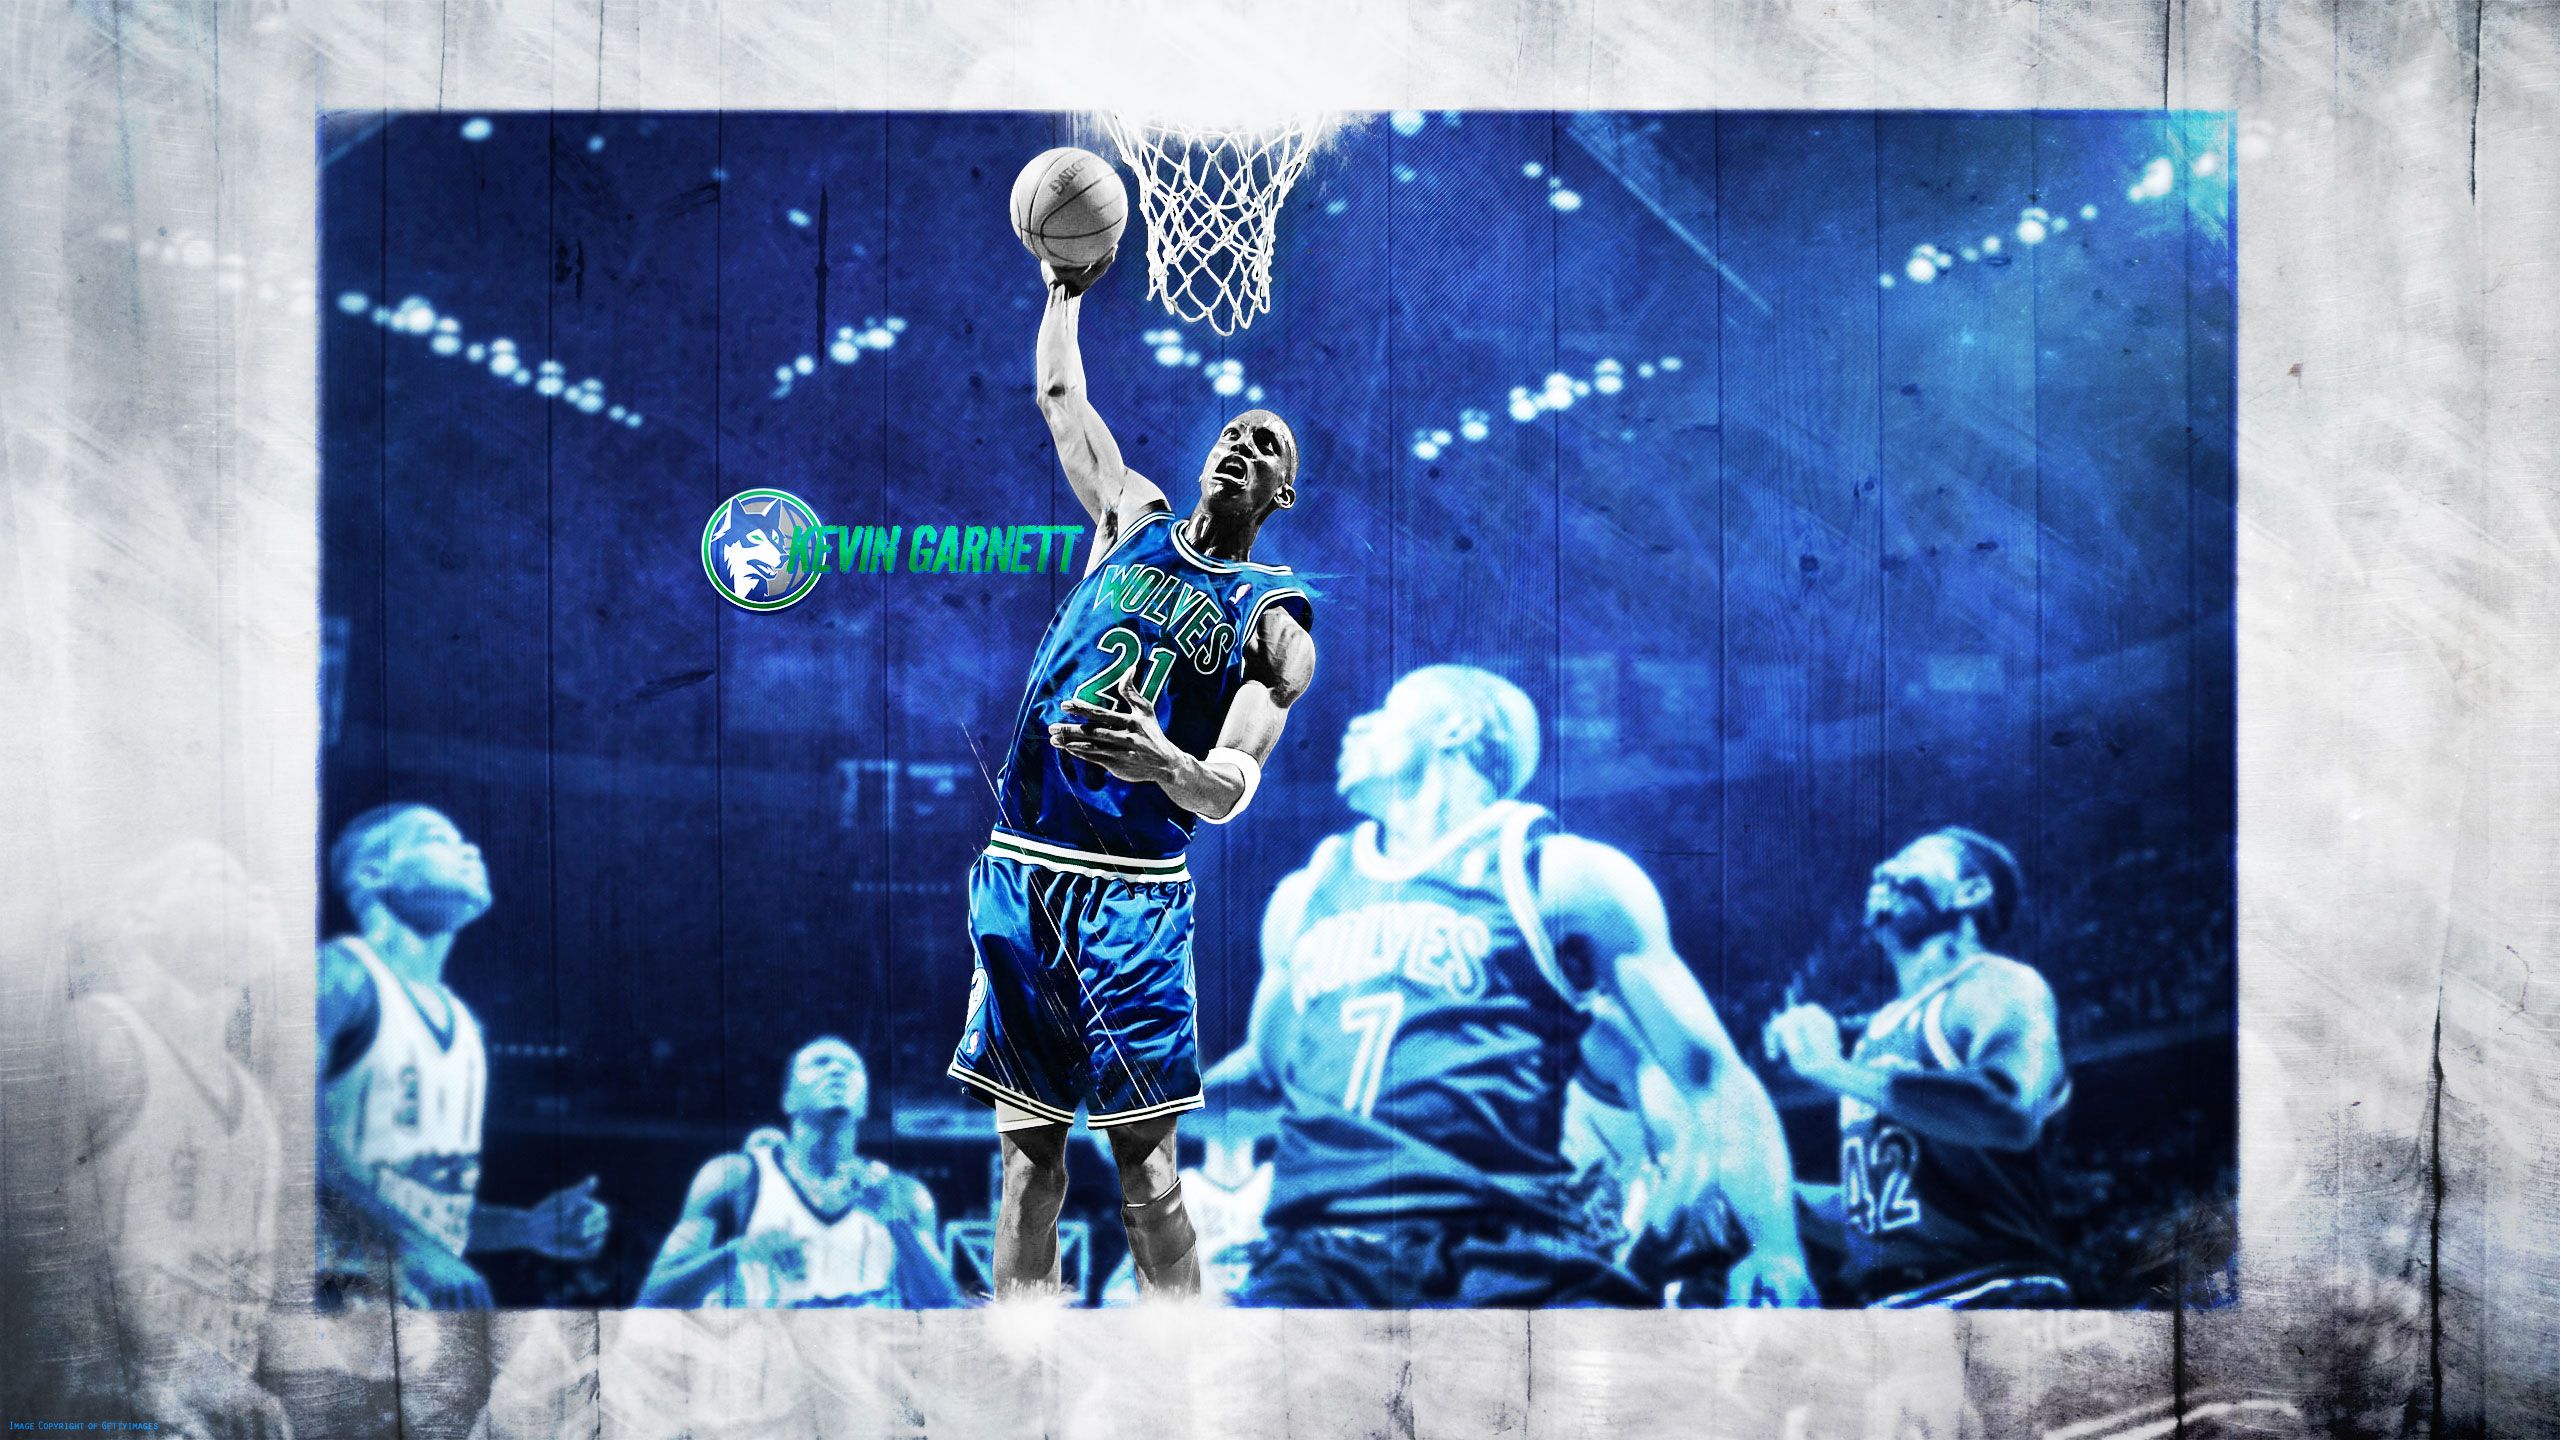 15 Kevin Garnett Wallpapers Download For Free HQ